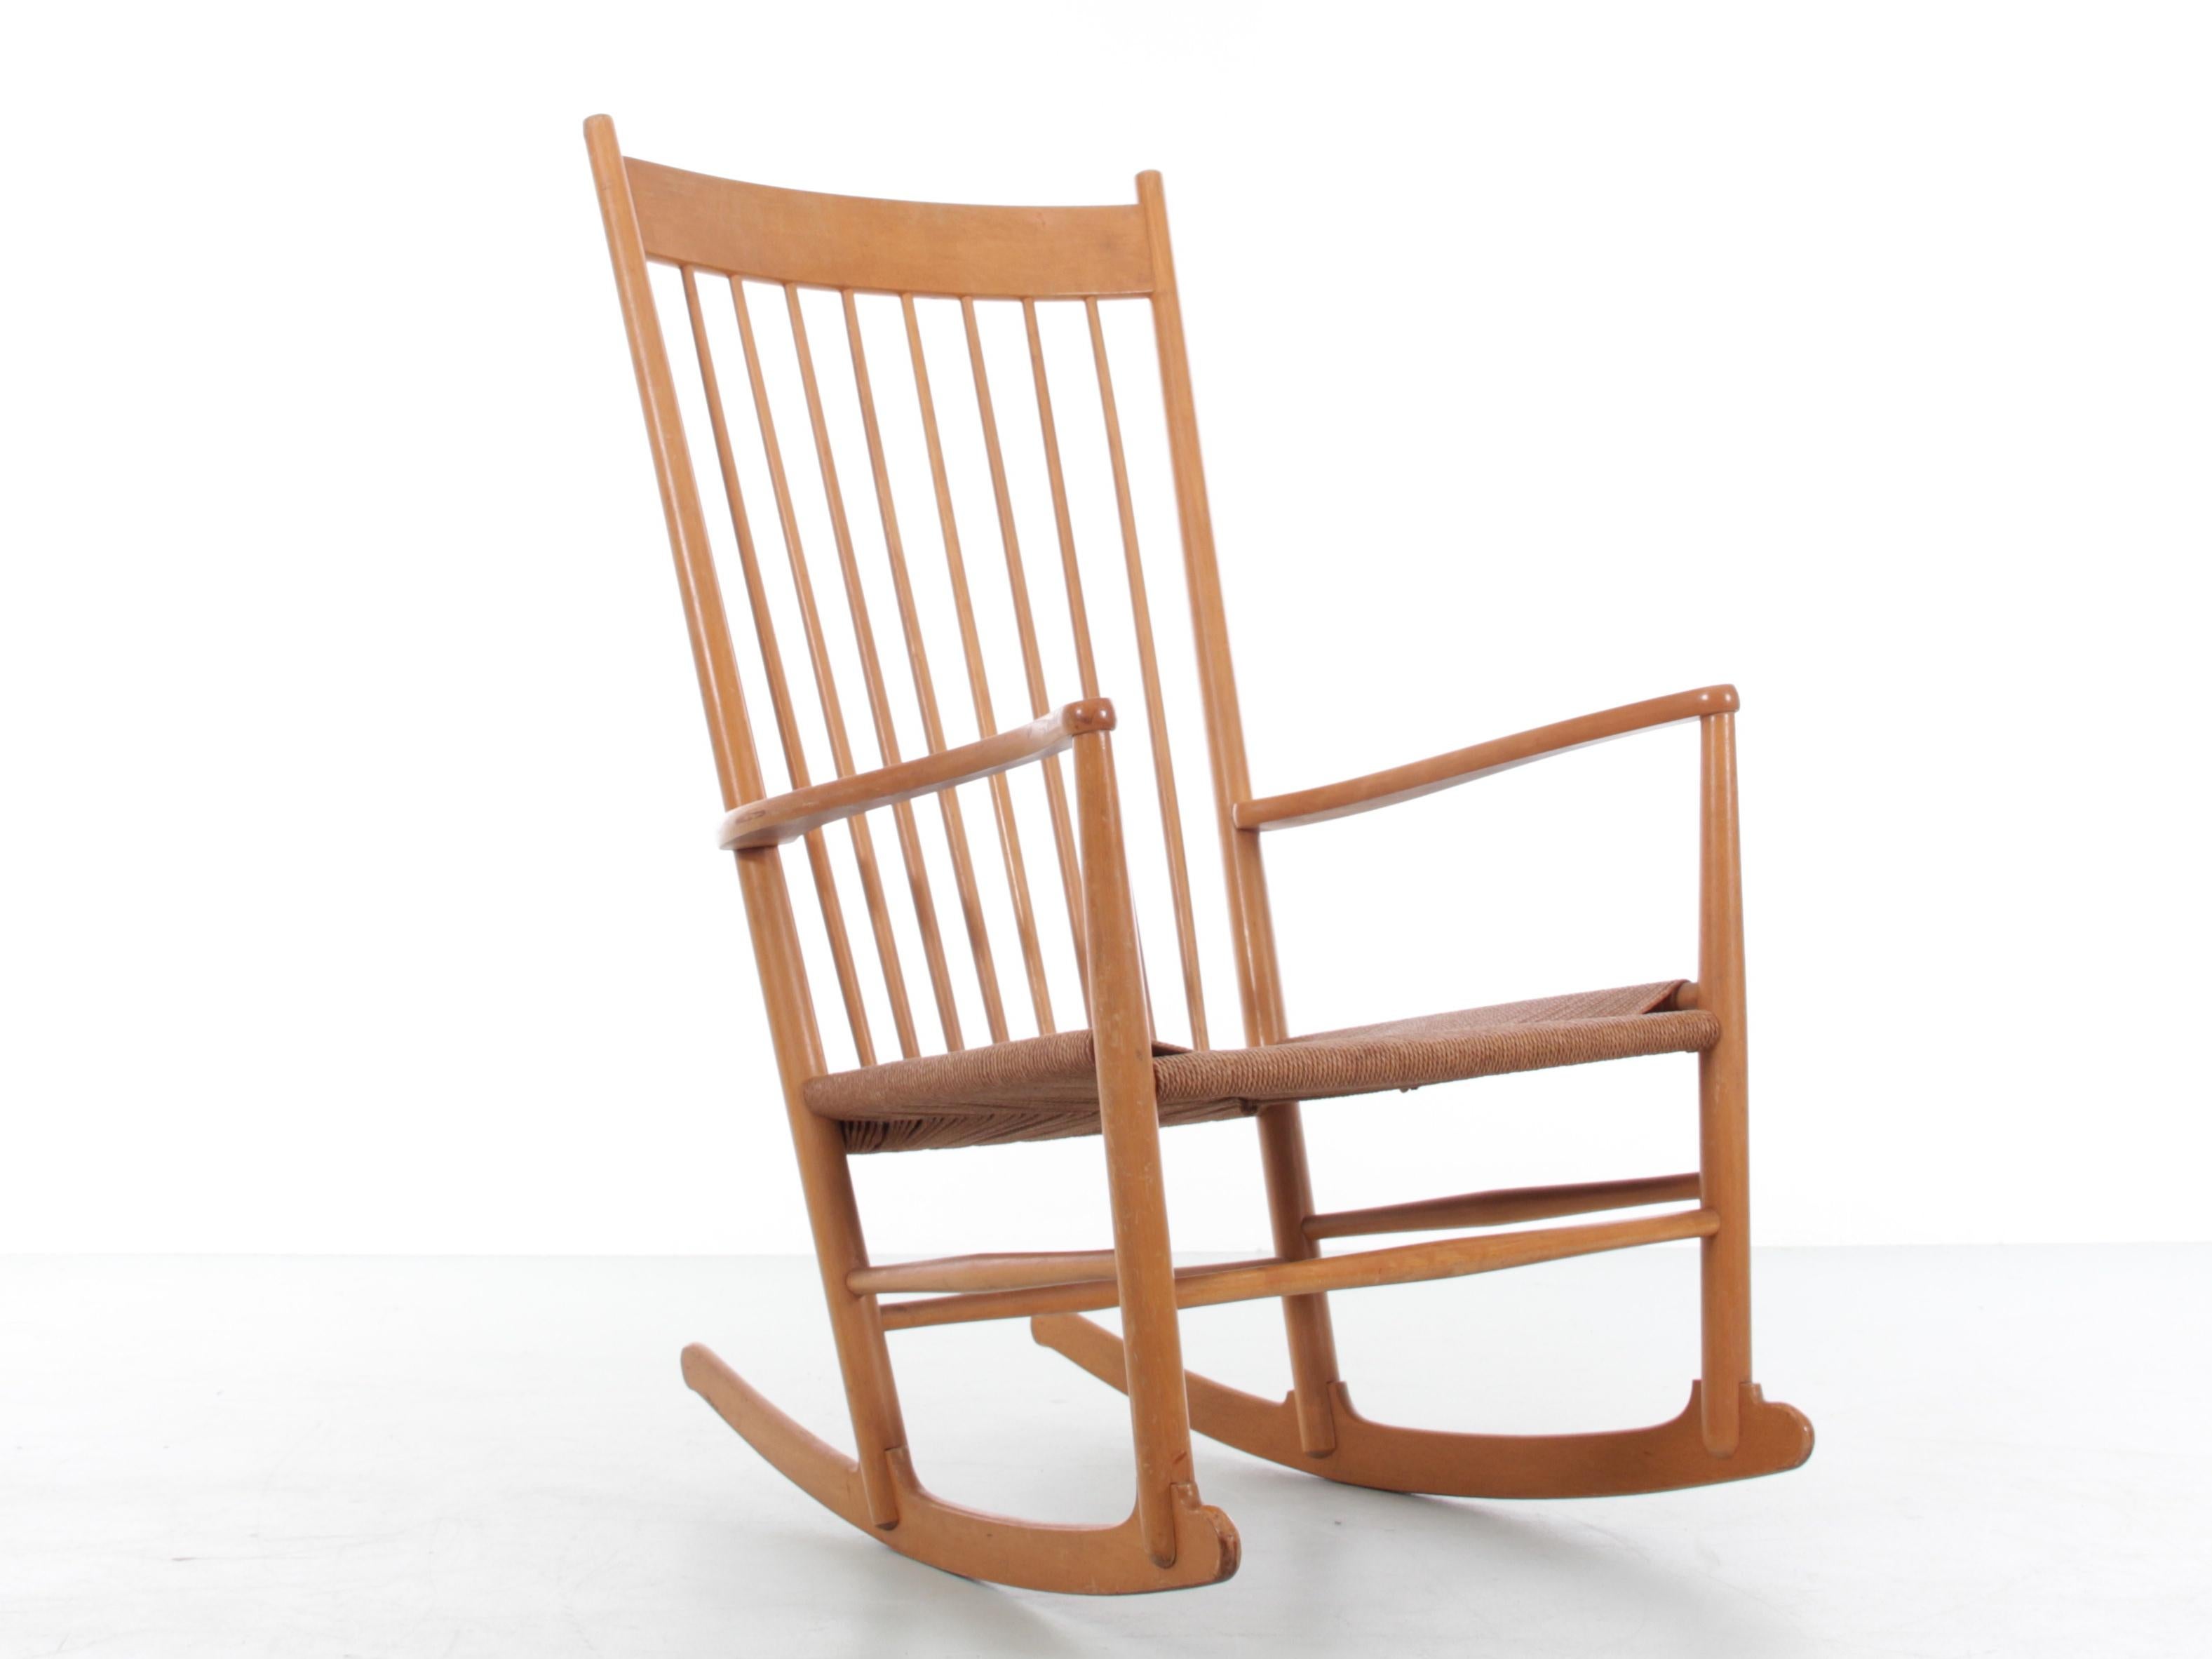 Mid-Century Modern scandinavian rocking chair model J16 by Hans Wegner for FDB

Designed in 1944, Wegner 's rocker with the sensually curved arms was inspired by traditional Windsor and Shaker furniture, fused with Wegner’s poetic lines.